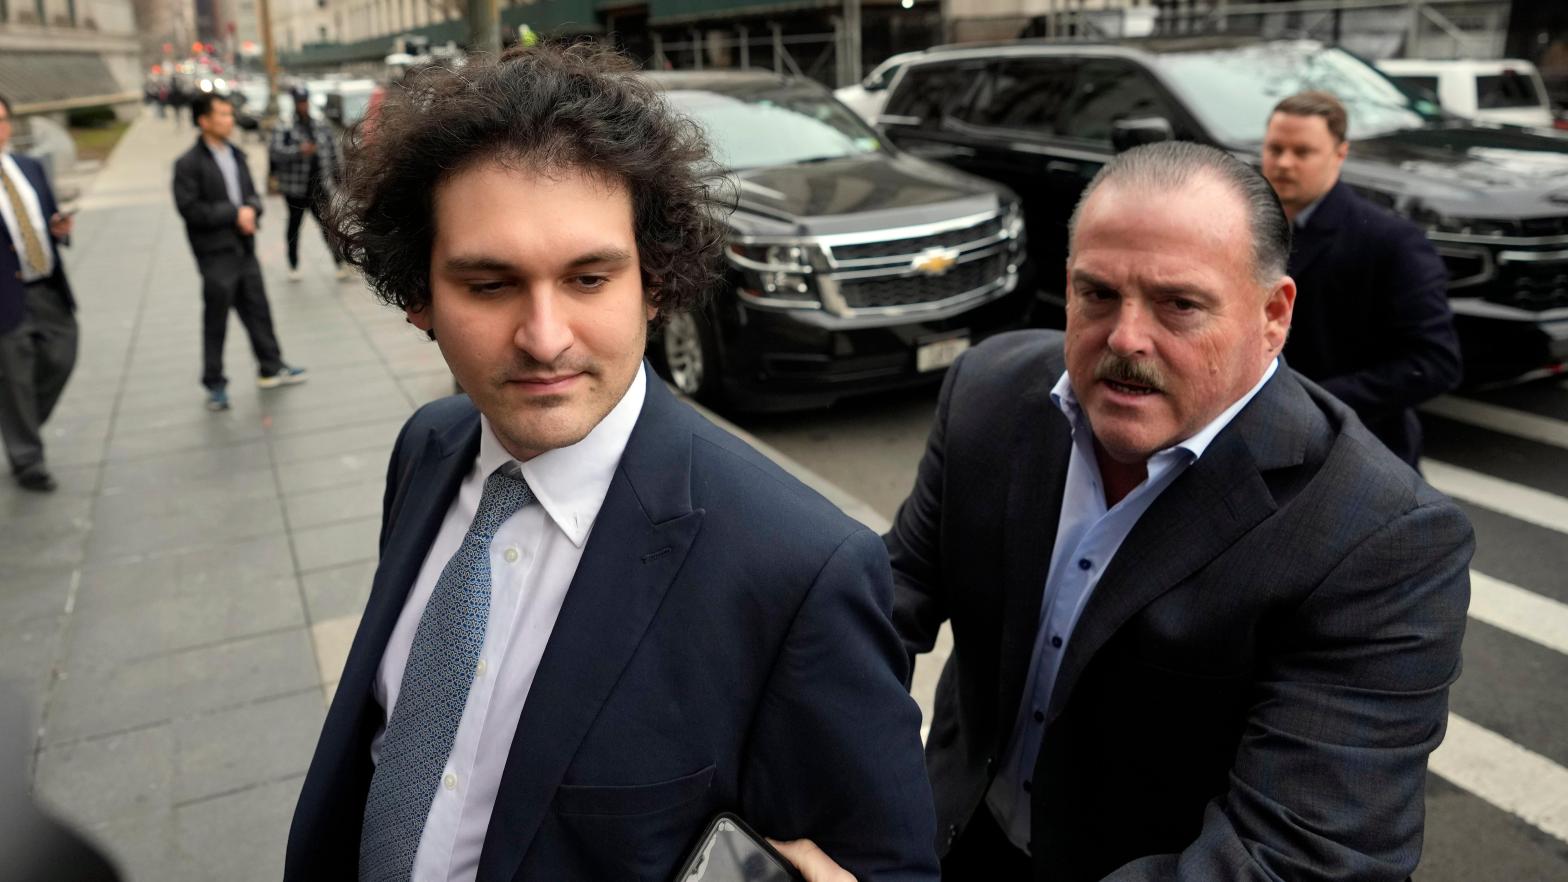 Sam Bankman-Fried has been in and out of court since late last year after federal prosecutors charged him with multiple counts of fraud and conspiracy regarding the collapse of FTX. (Photo: John Minchillo, AP)